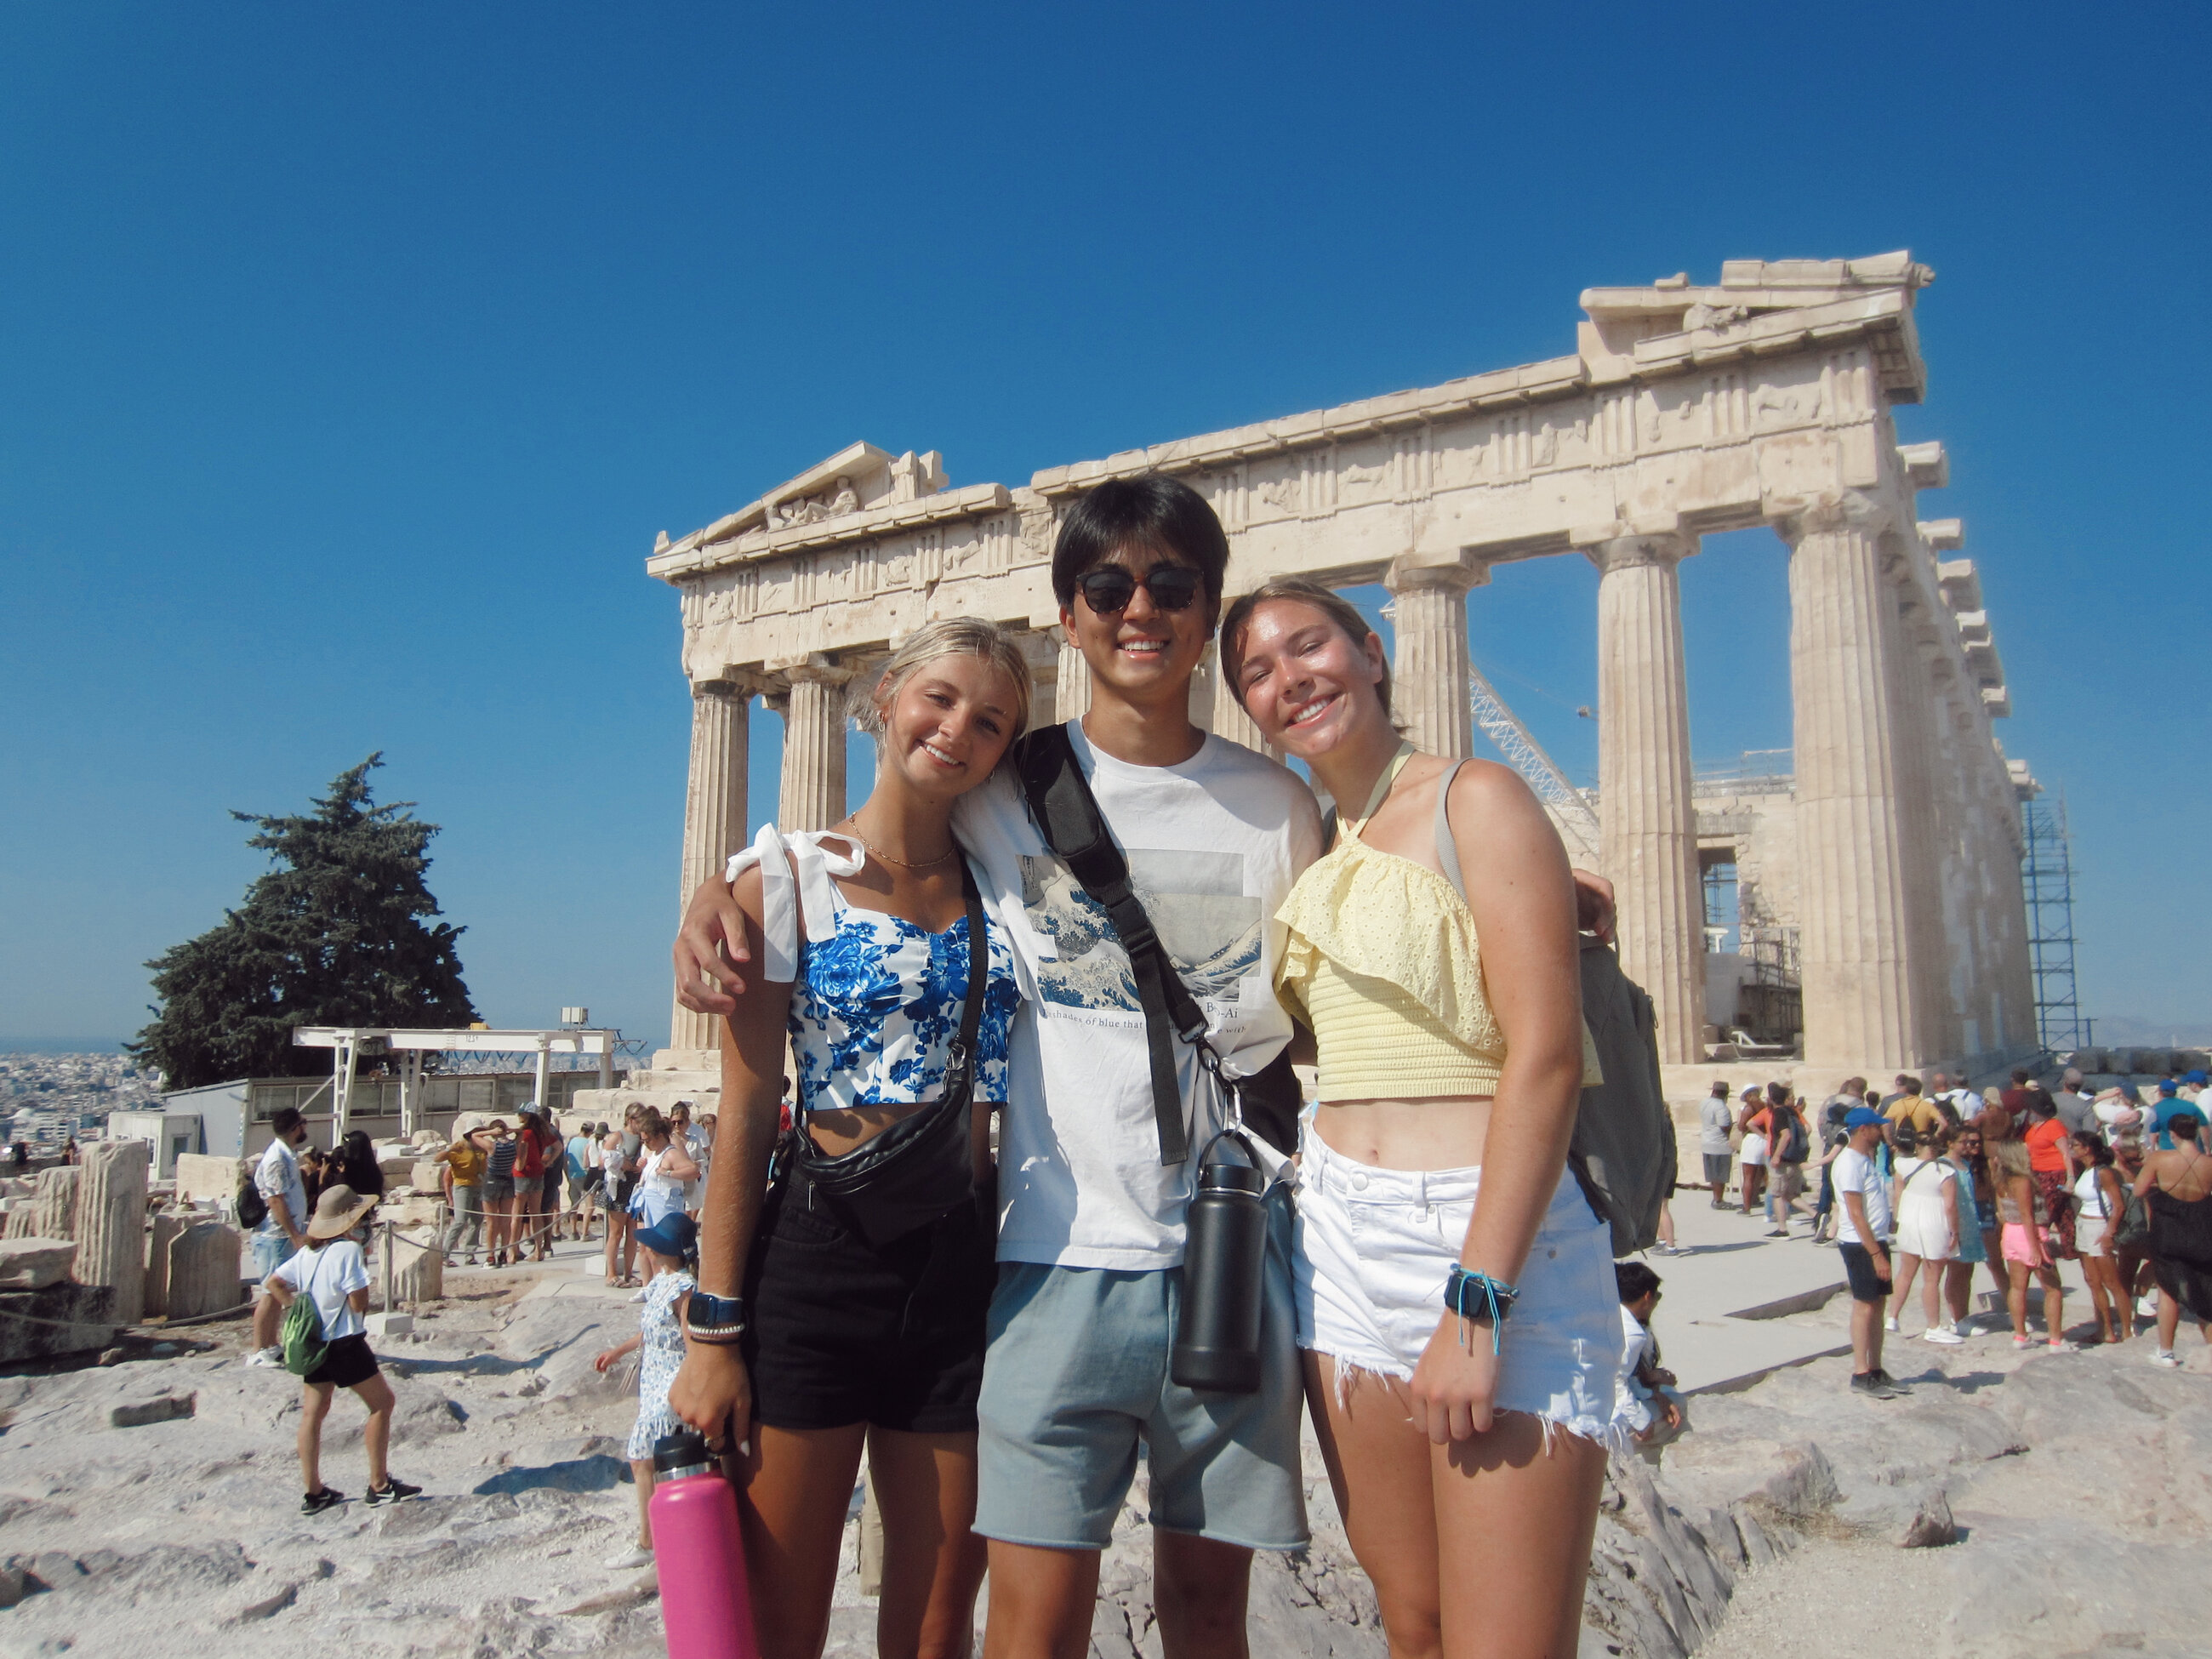 Us at the Acropolis in Athens!!